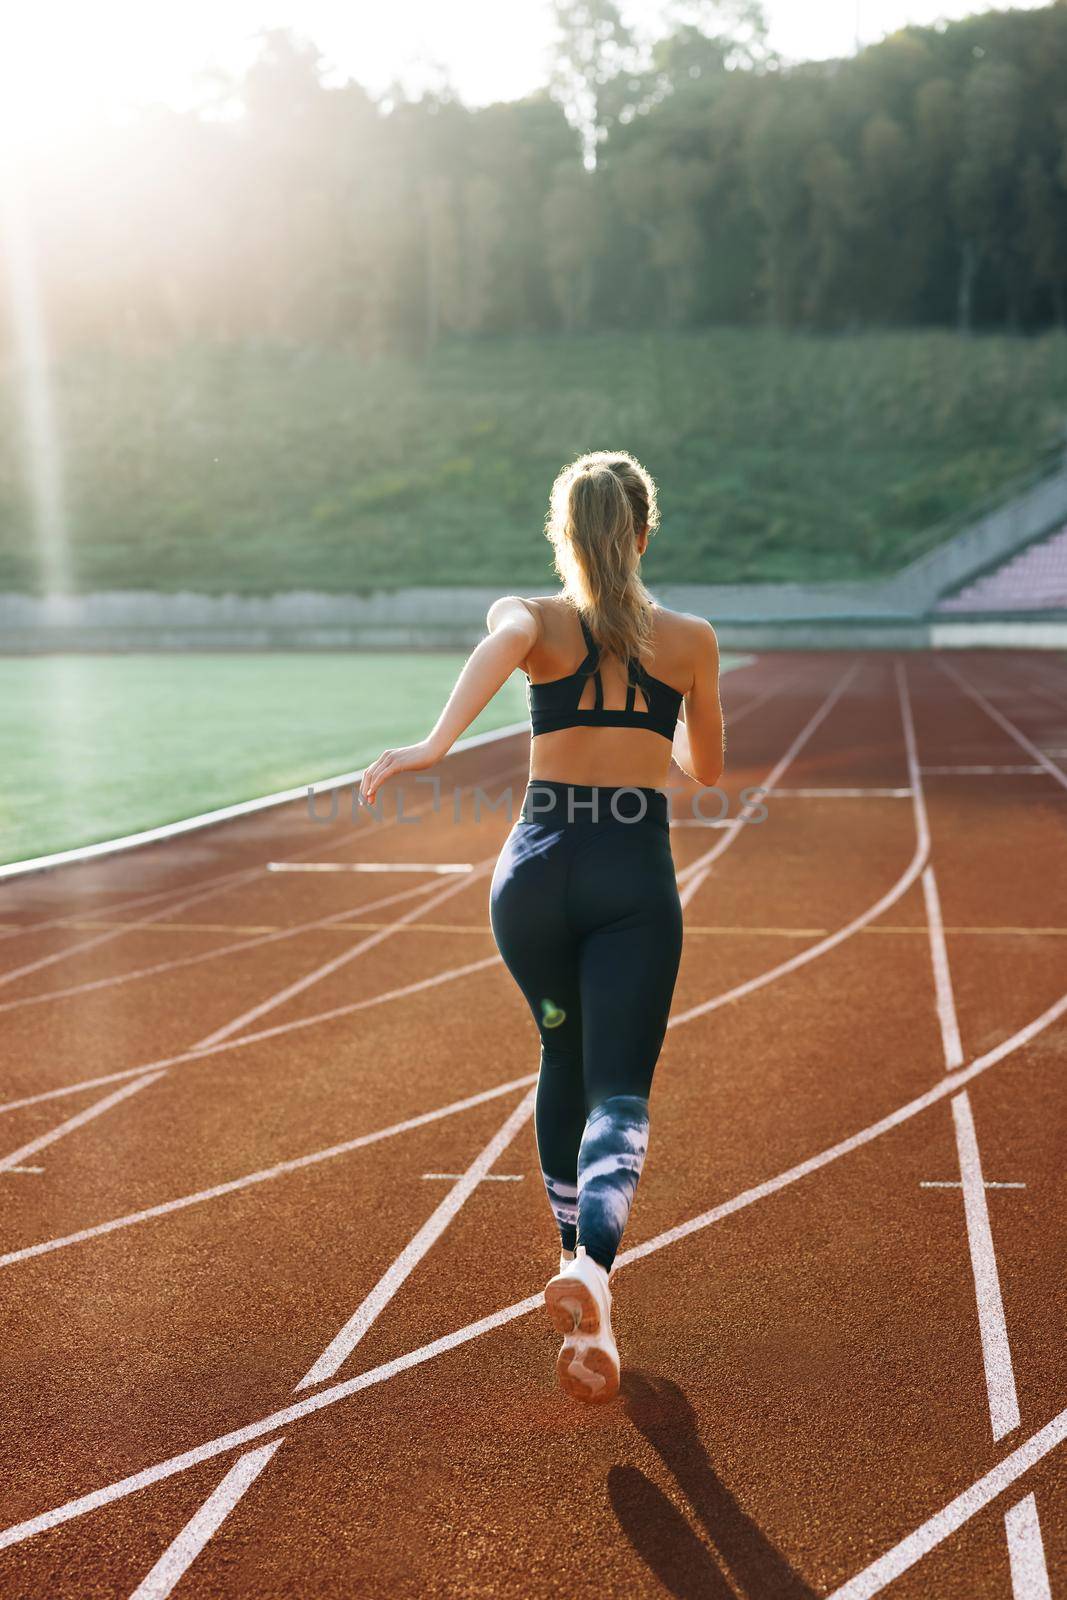 Rear view of Athlete Woman Running Fast at Track in the Morning Light , Training Hard, Getting Ready for Race Competition or Marathon. Fit Girl in Black Sportswear Jogging on a Running Track by uflypro